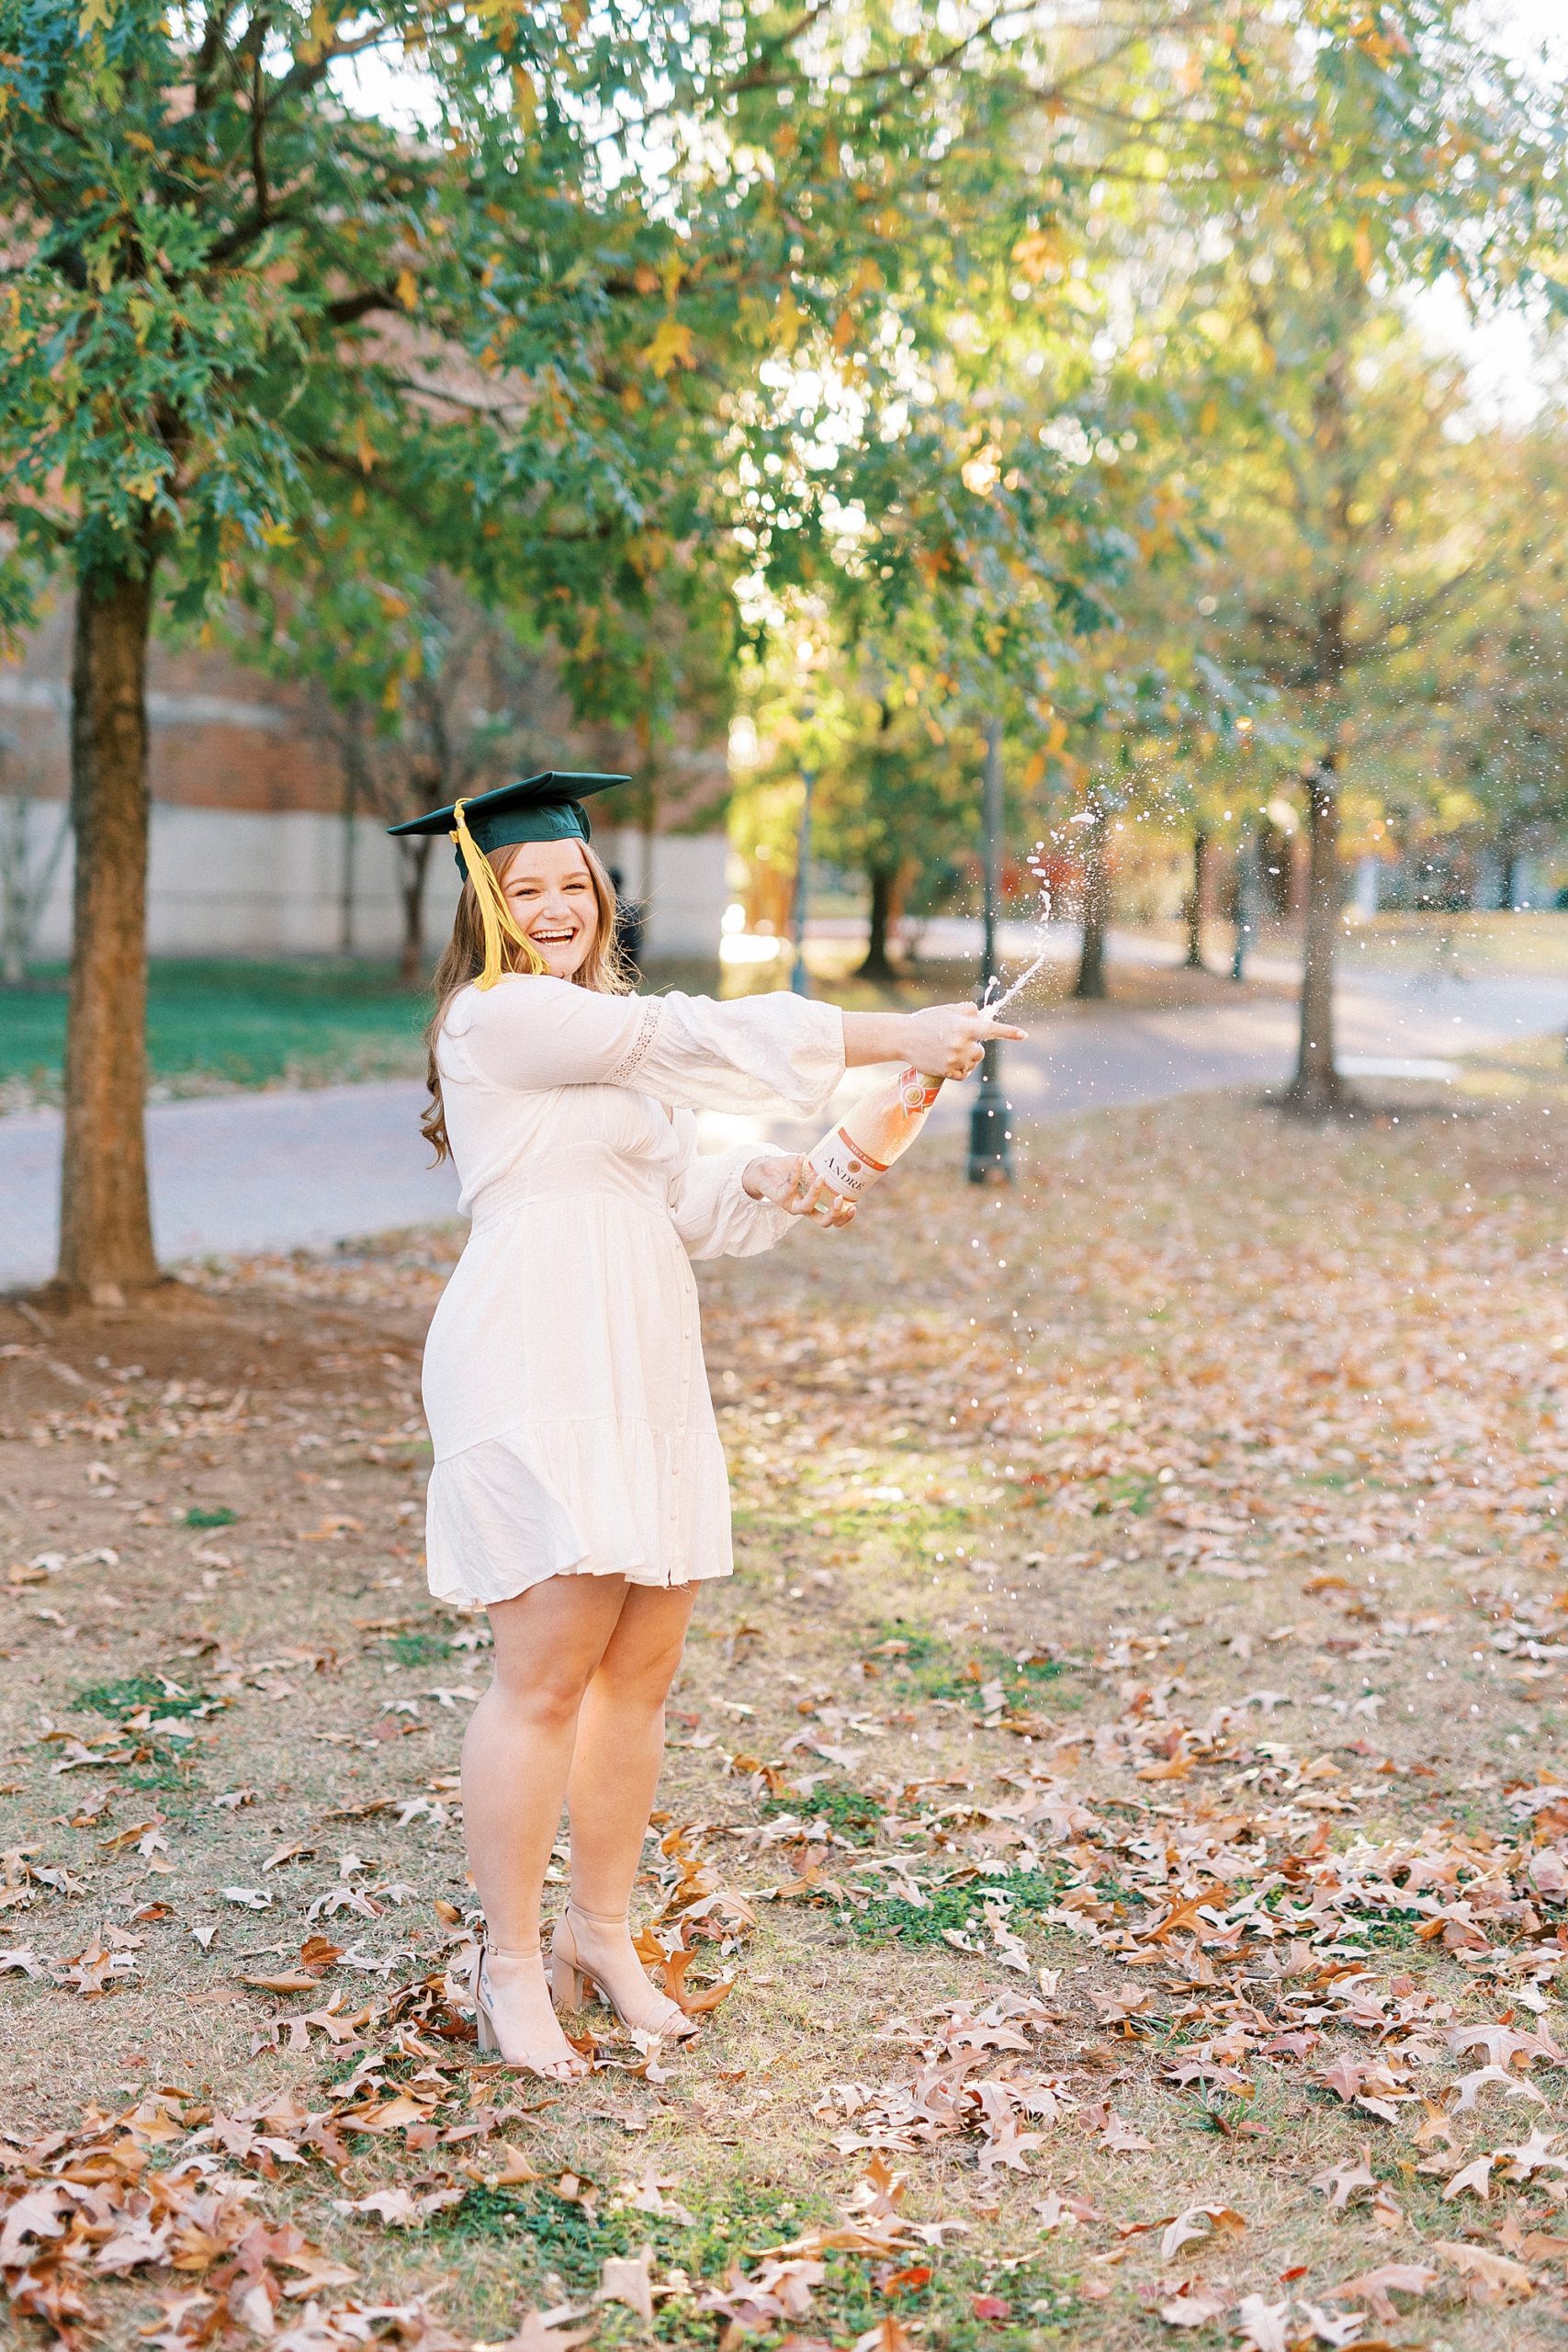 graduate in white dress with green cap pops champagne on lawn at UNC Charlotte